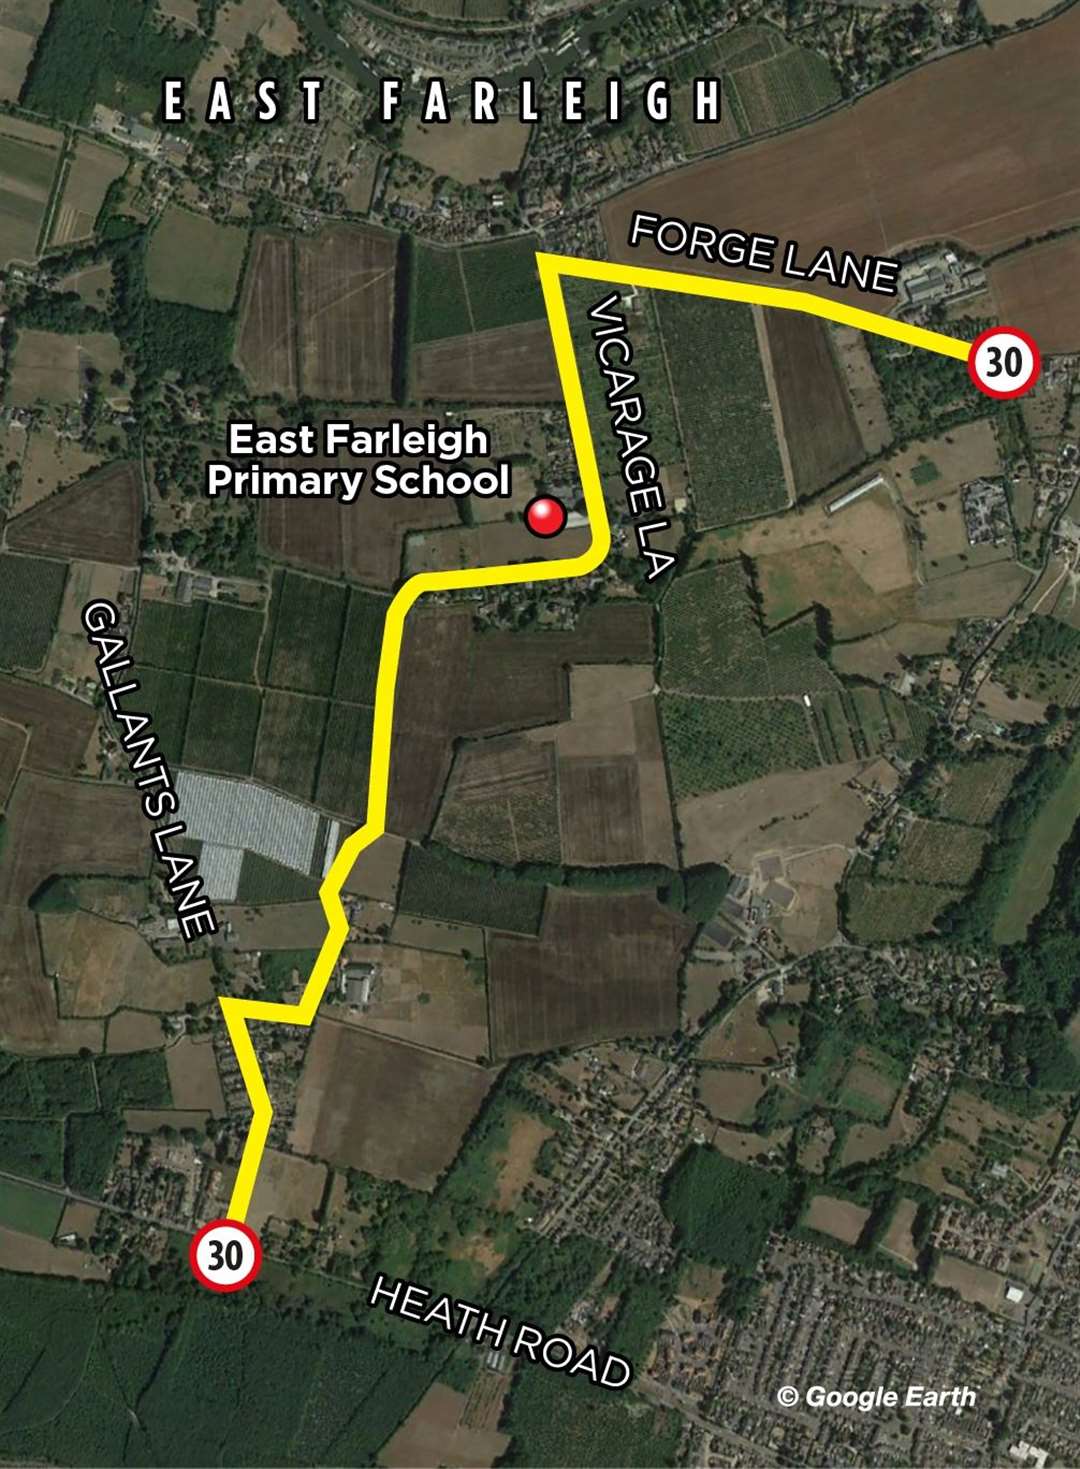 New 30mph limit proposed for East Farleigh